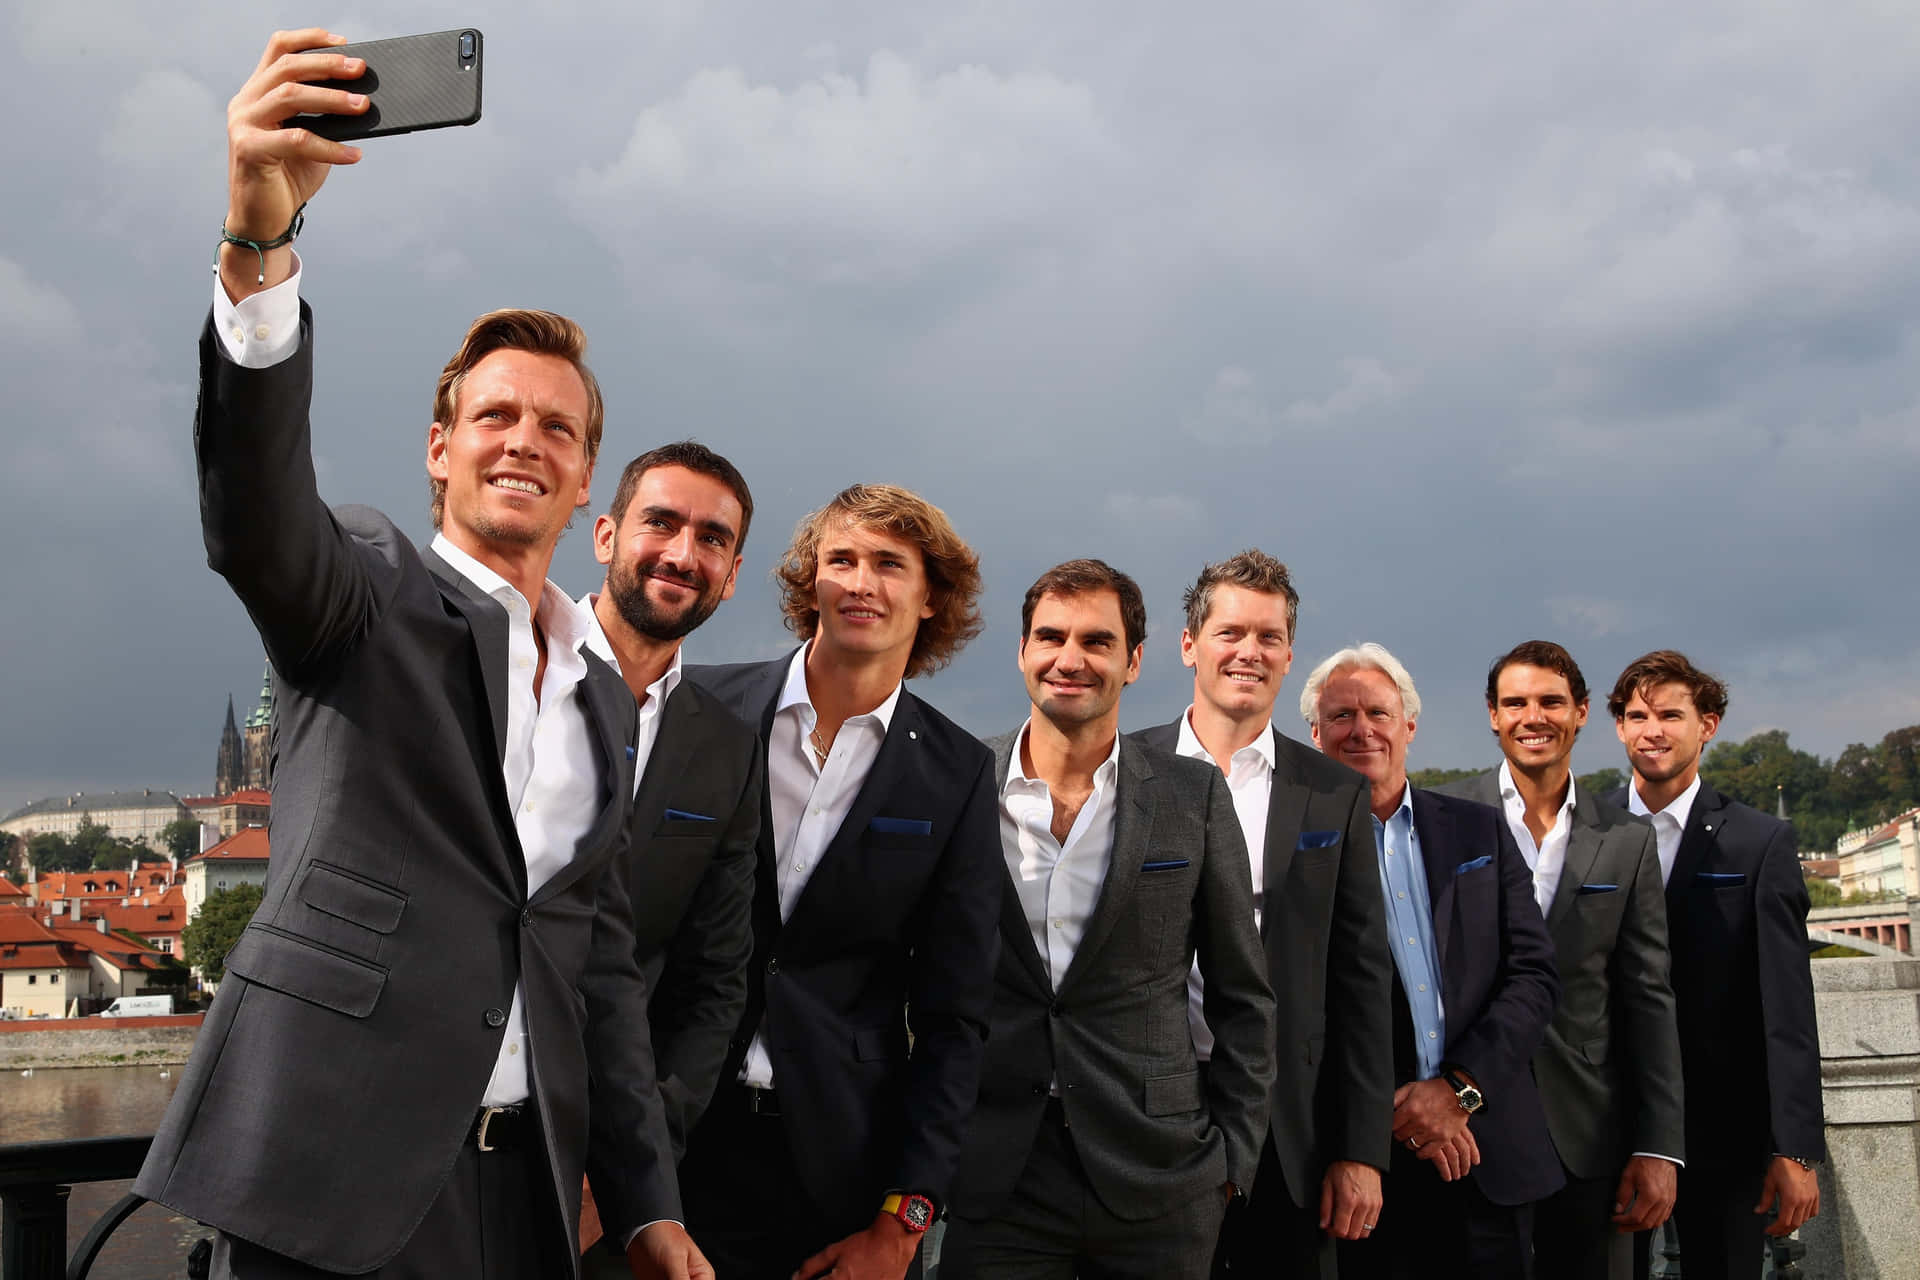 Thomas Enqvist With Other Tennis Players Wallpaper